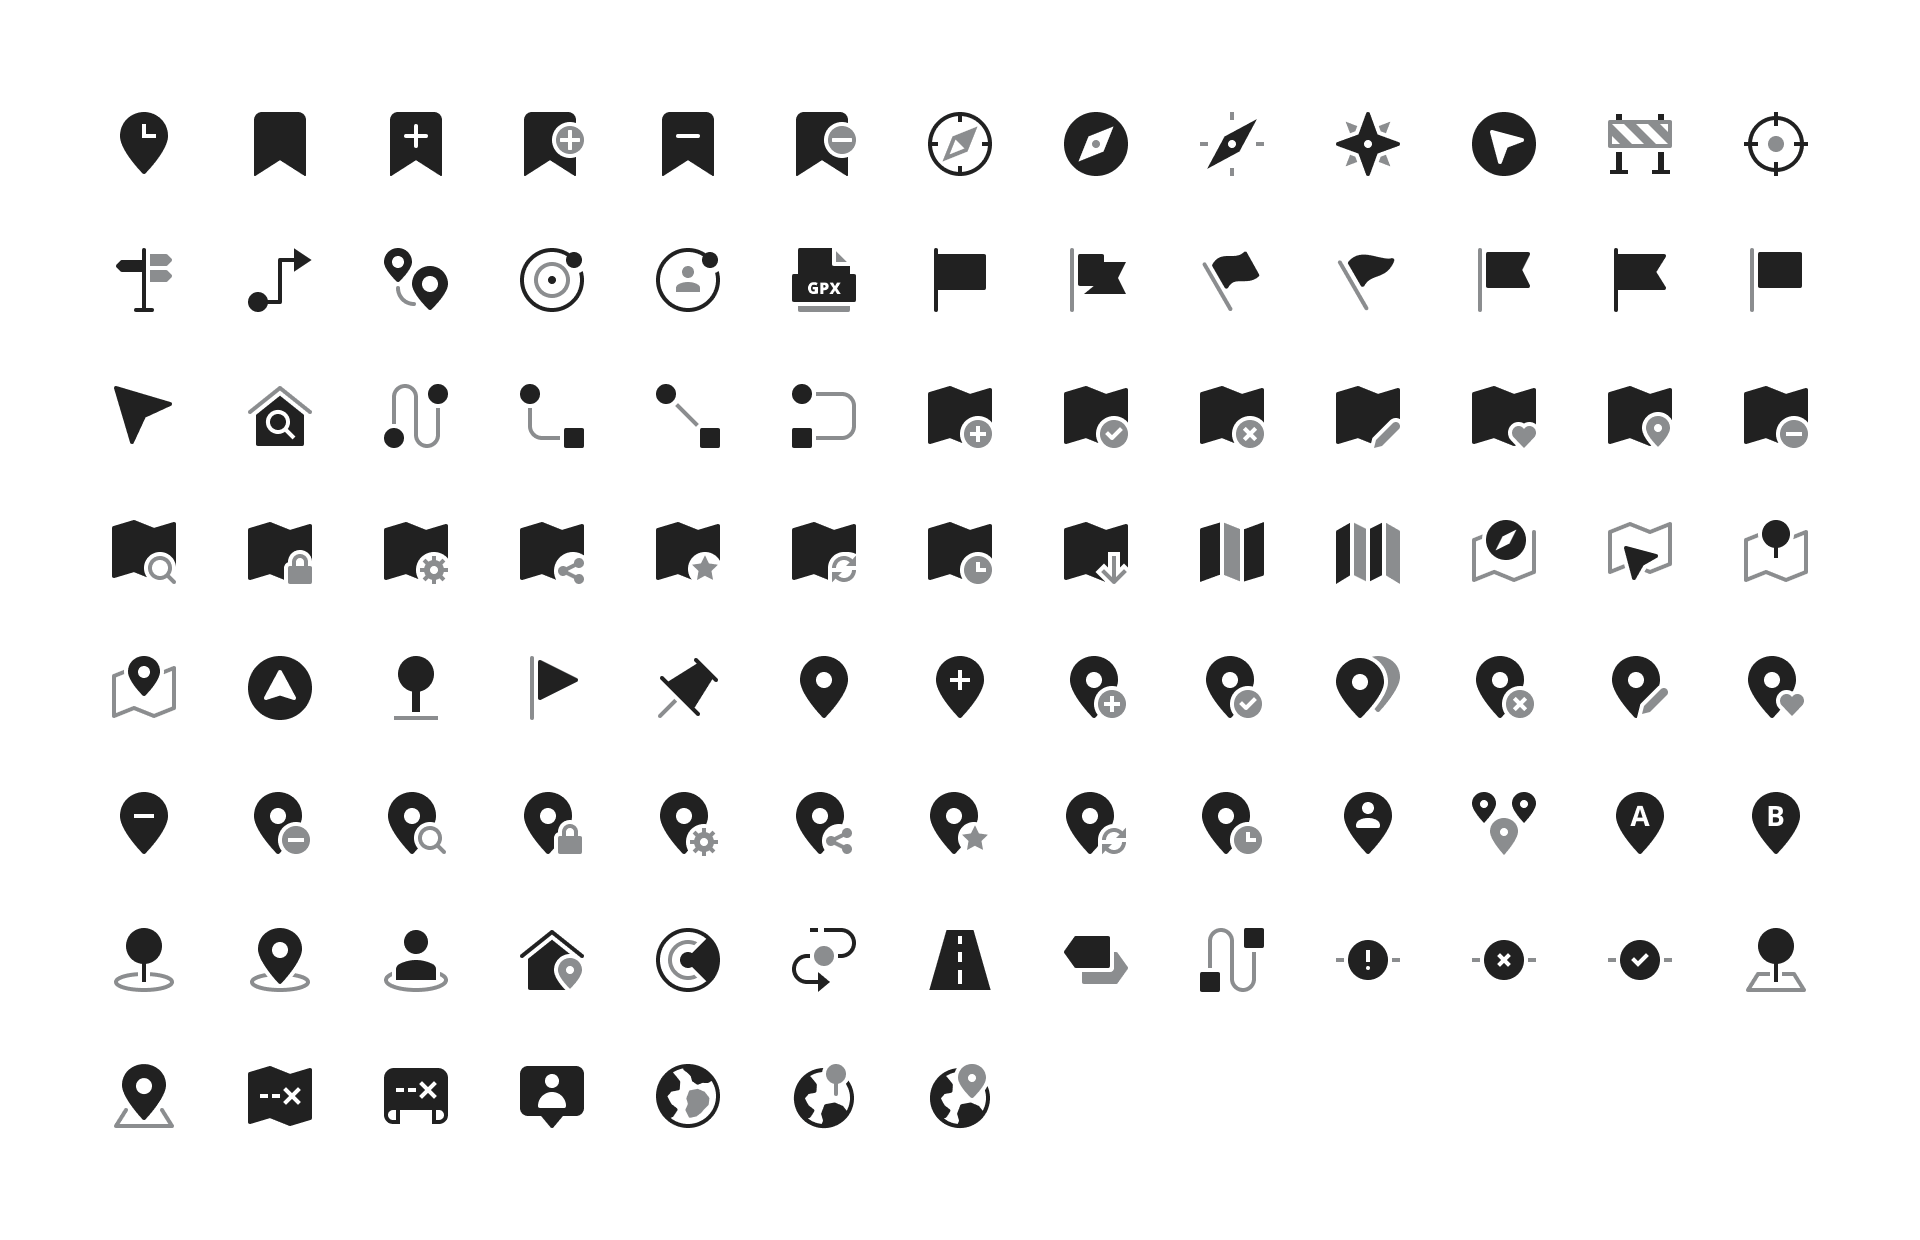 Maps and Location Icons